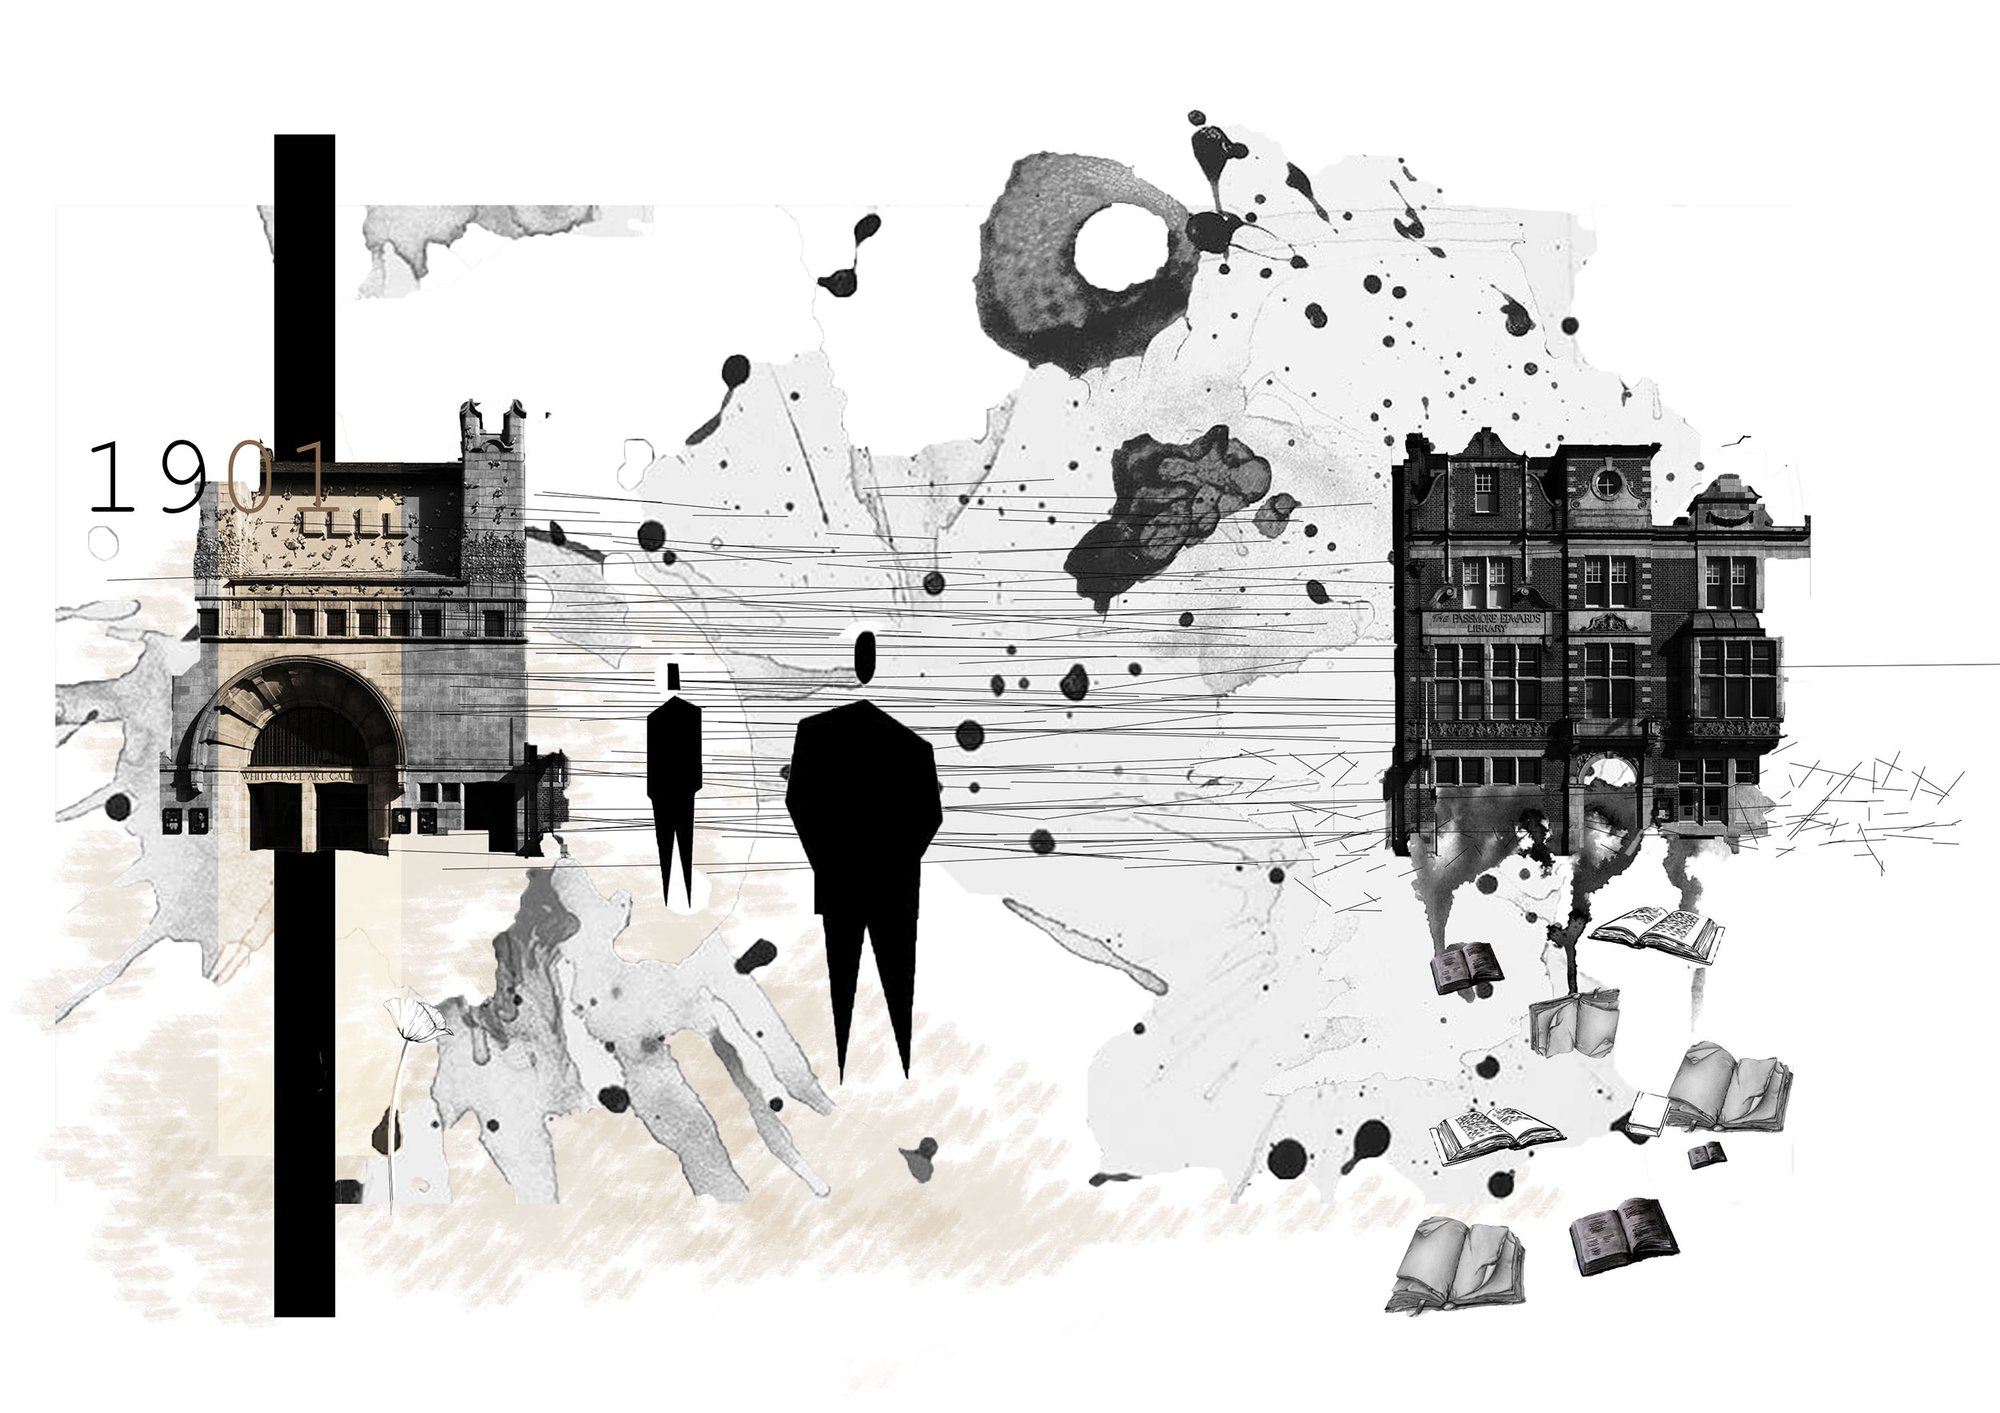 Collage of the history of Whitechapel Gallery